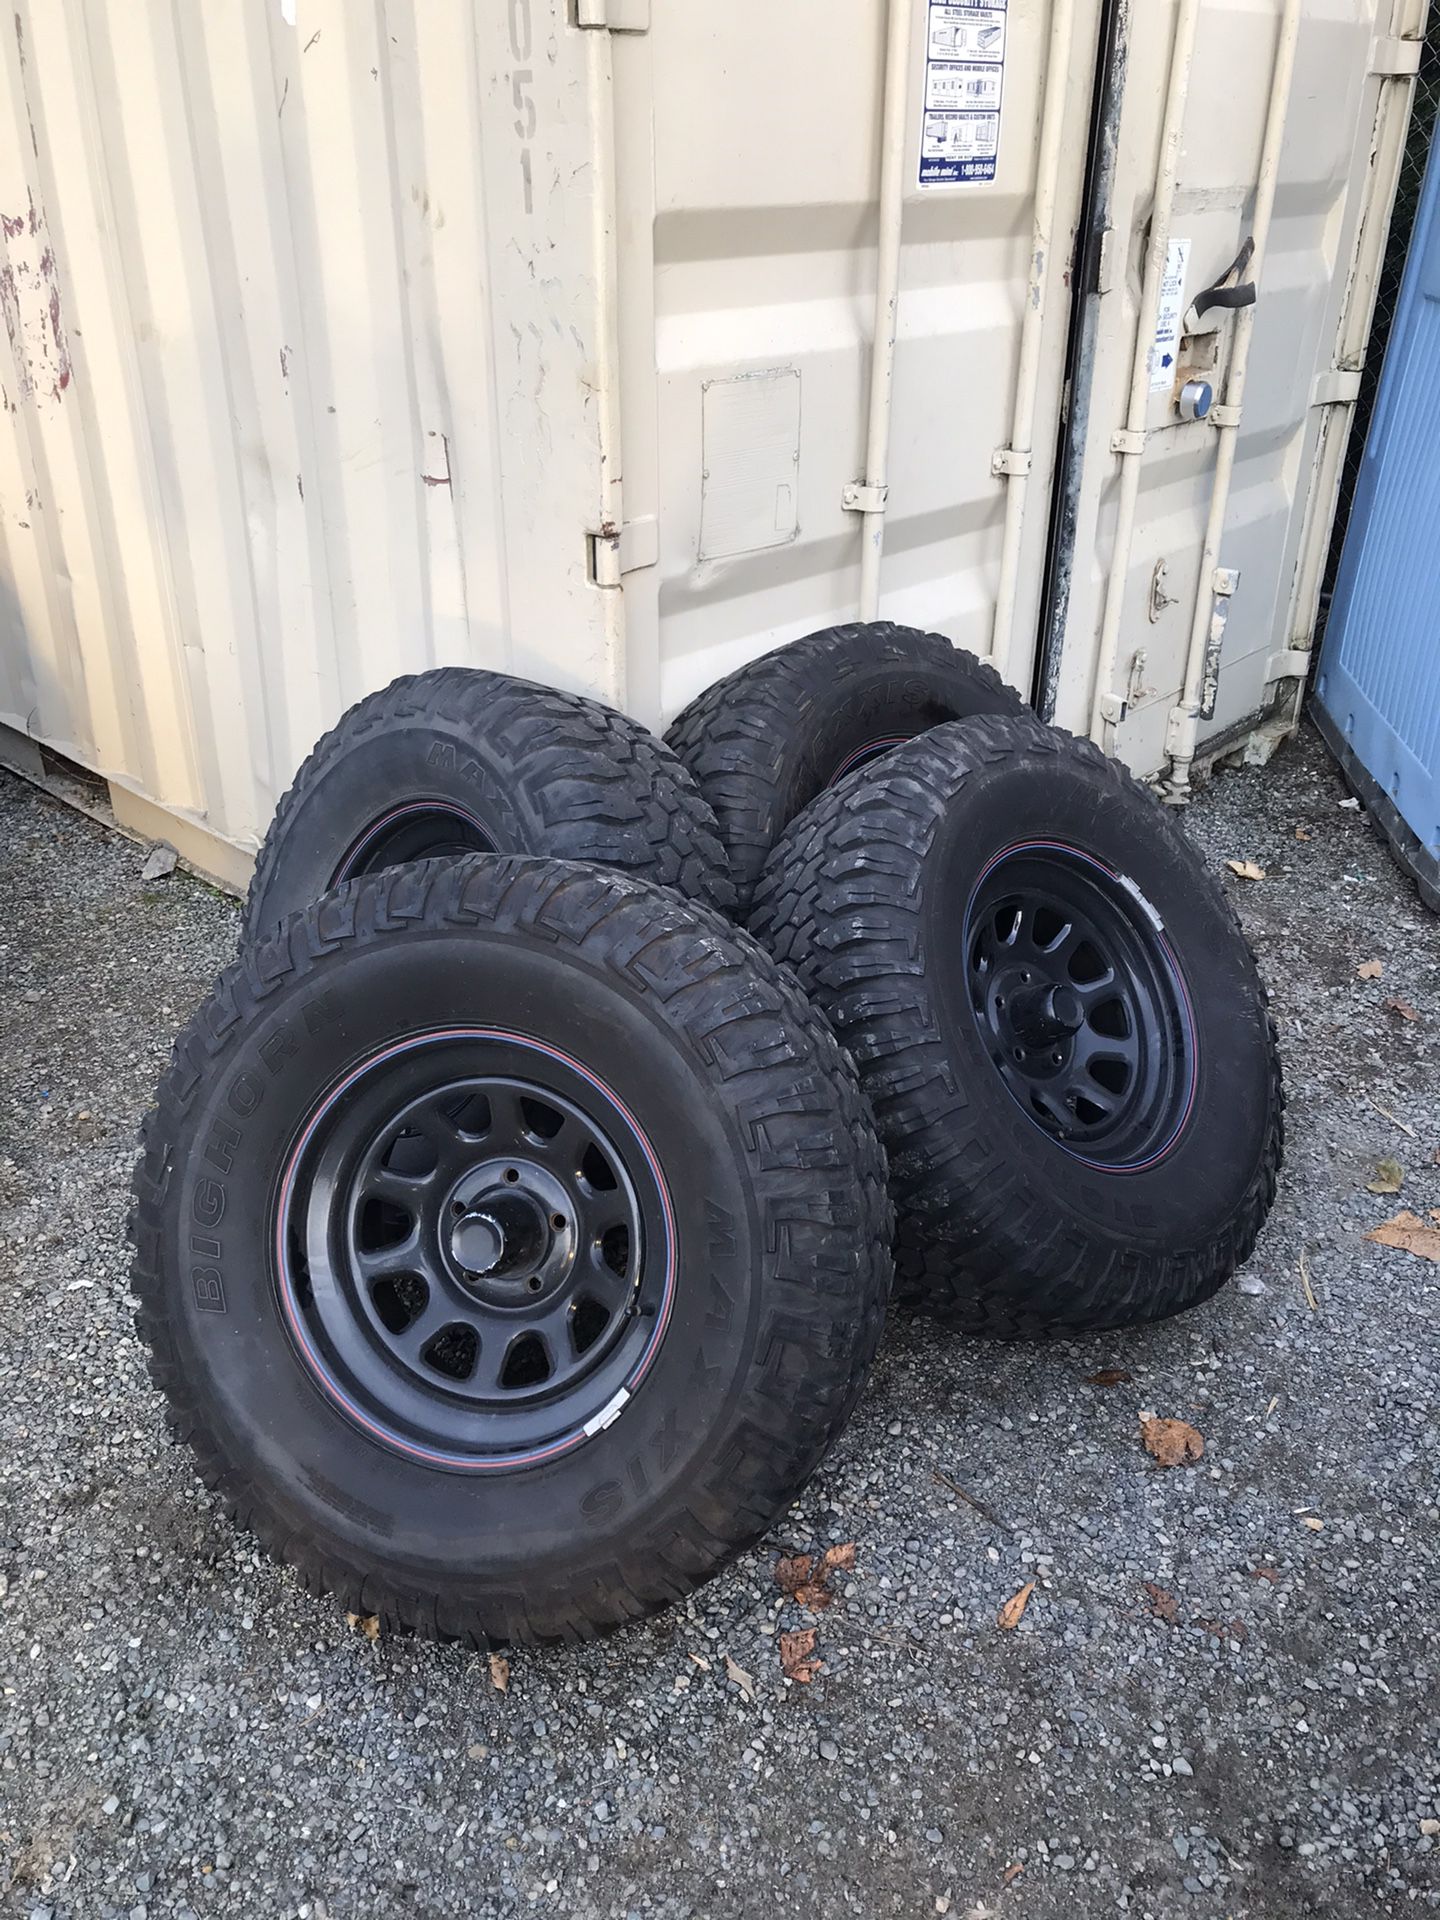 5-LT 305 70 17 Maxxis Bighorn Tires and Rims